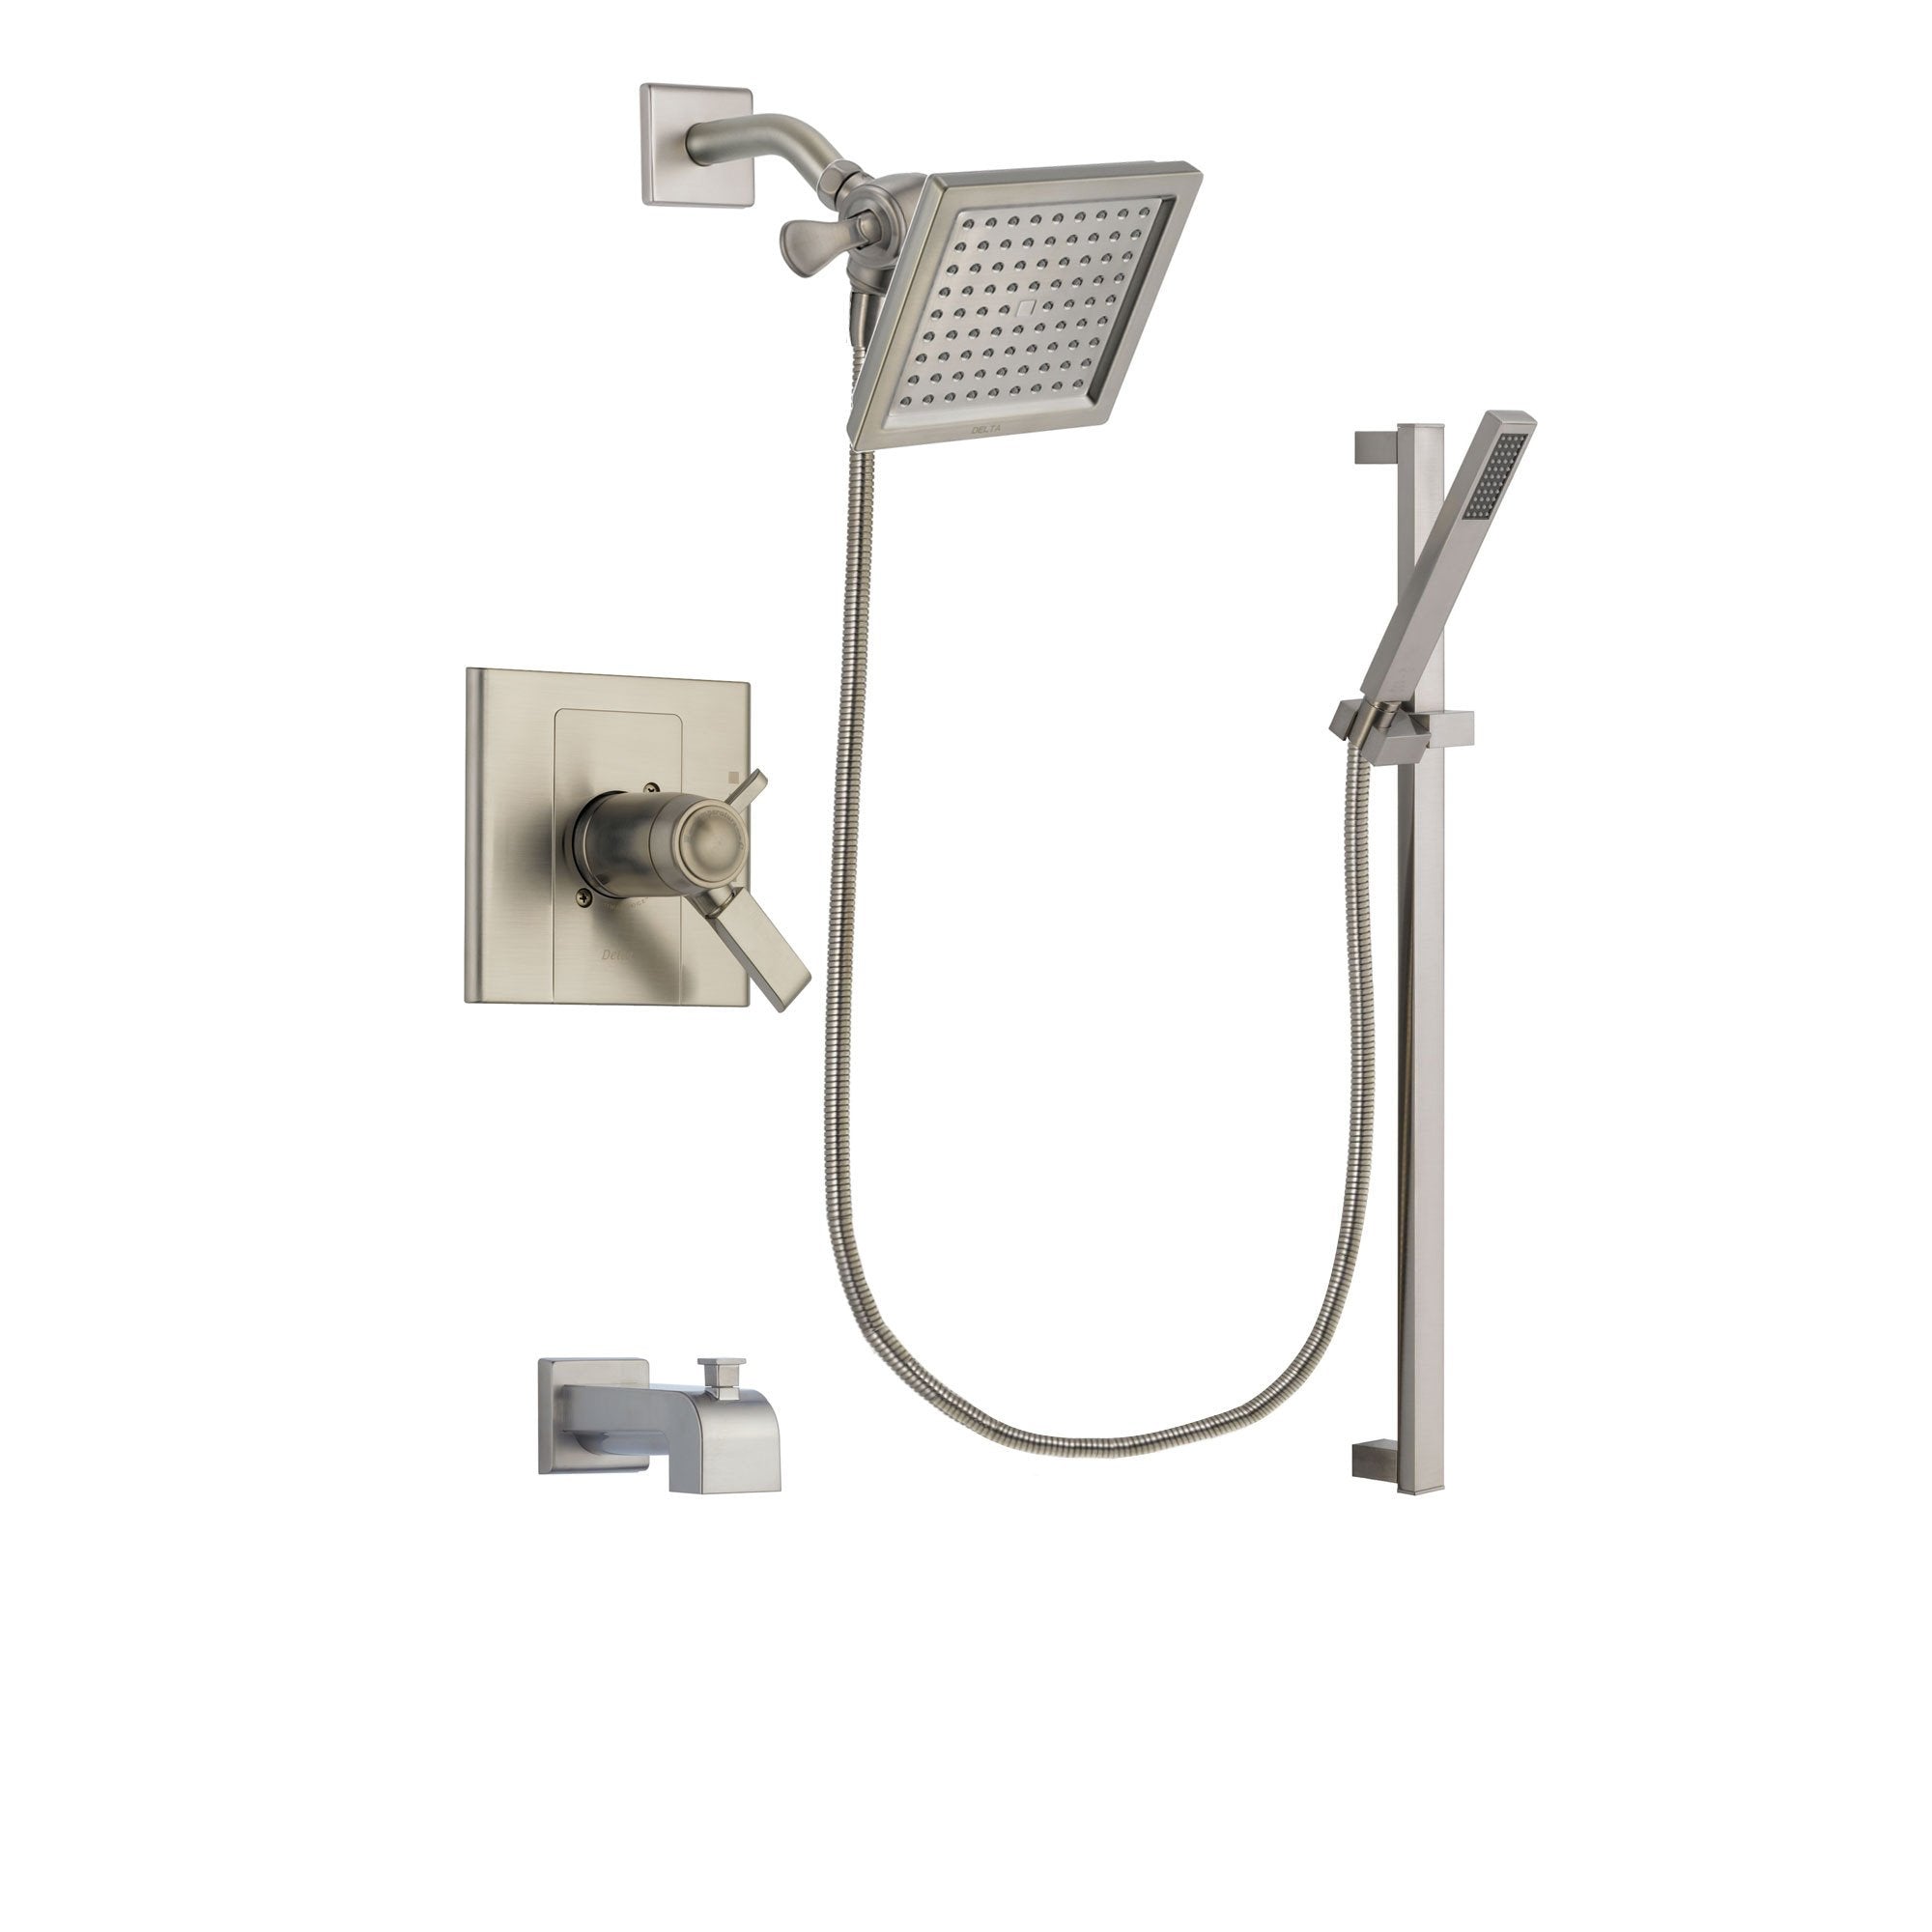 Delta Arzo Stainless Steel Finish Thermostatic Tub and Shower Faucet System Package with 6.5-inch Square Rain Showerhead and Modern Personal Hand Shower with Slide Bar Includes Rough-in Valve and Tub Spout DSP2349V